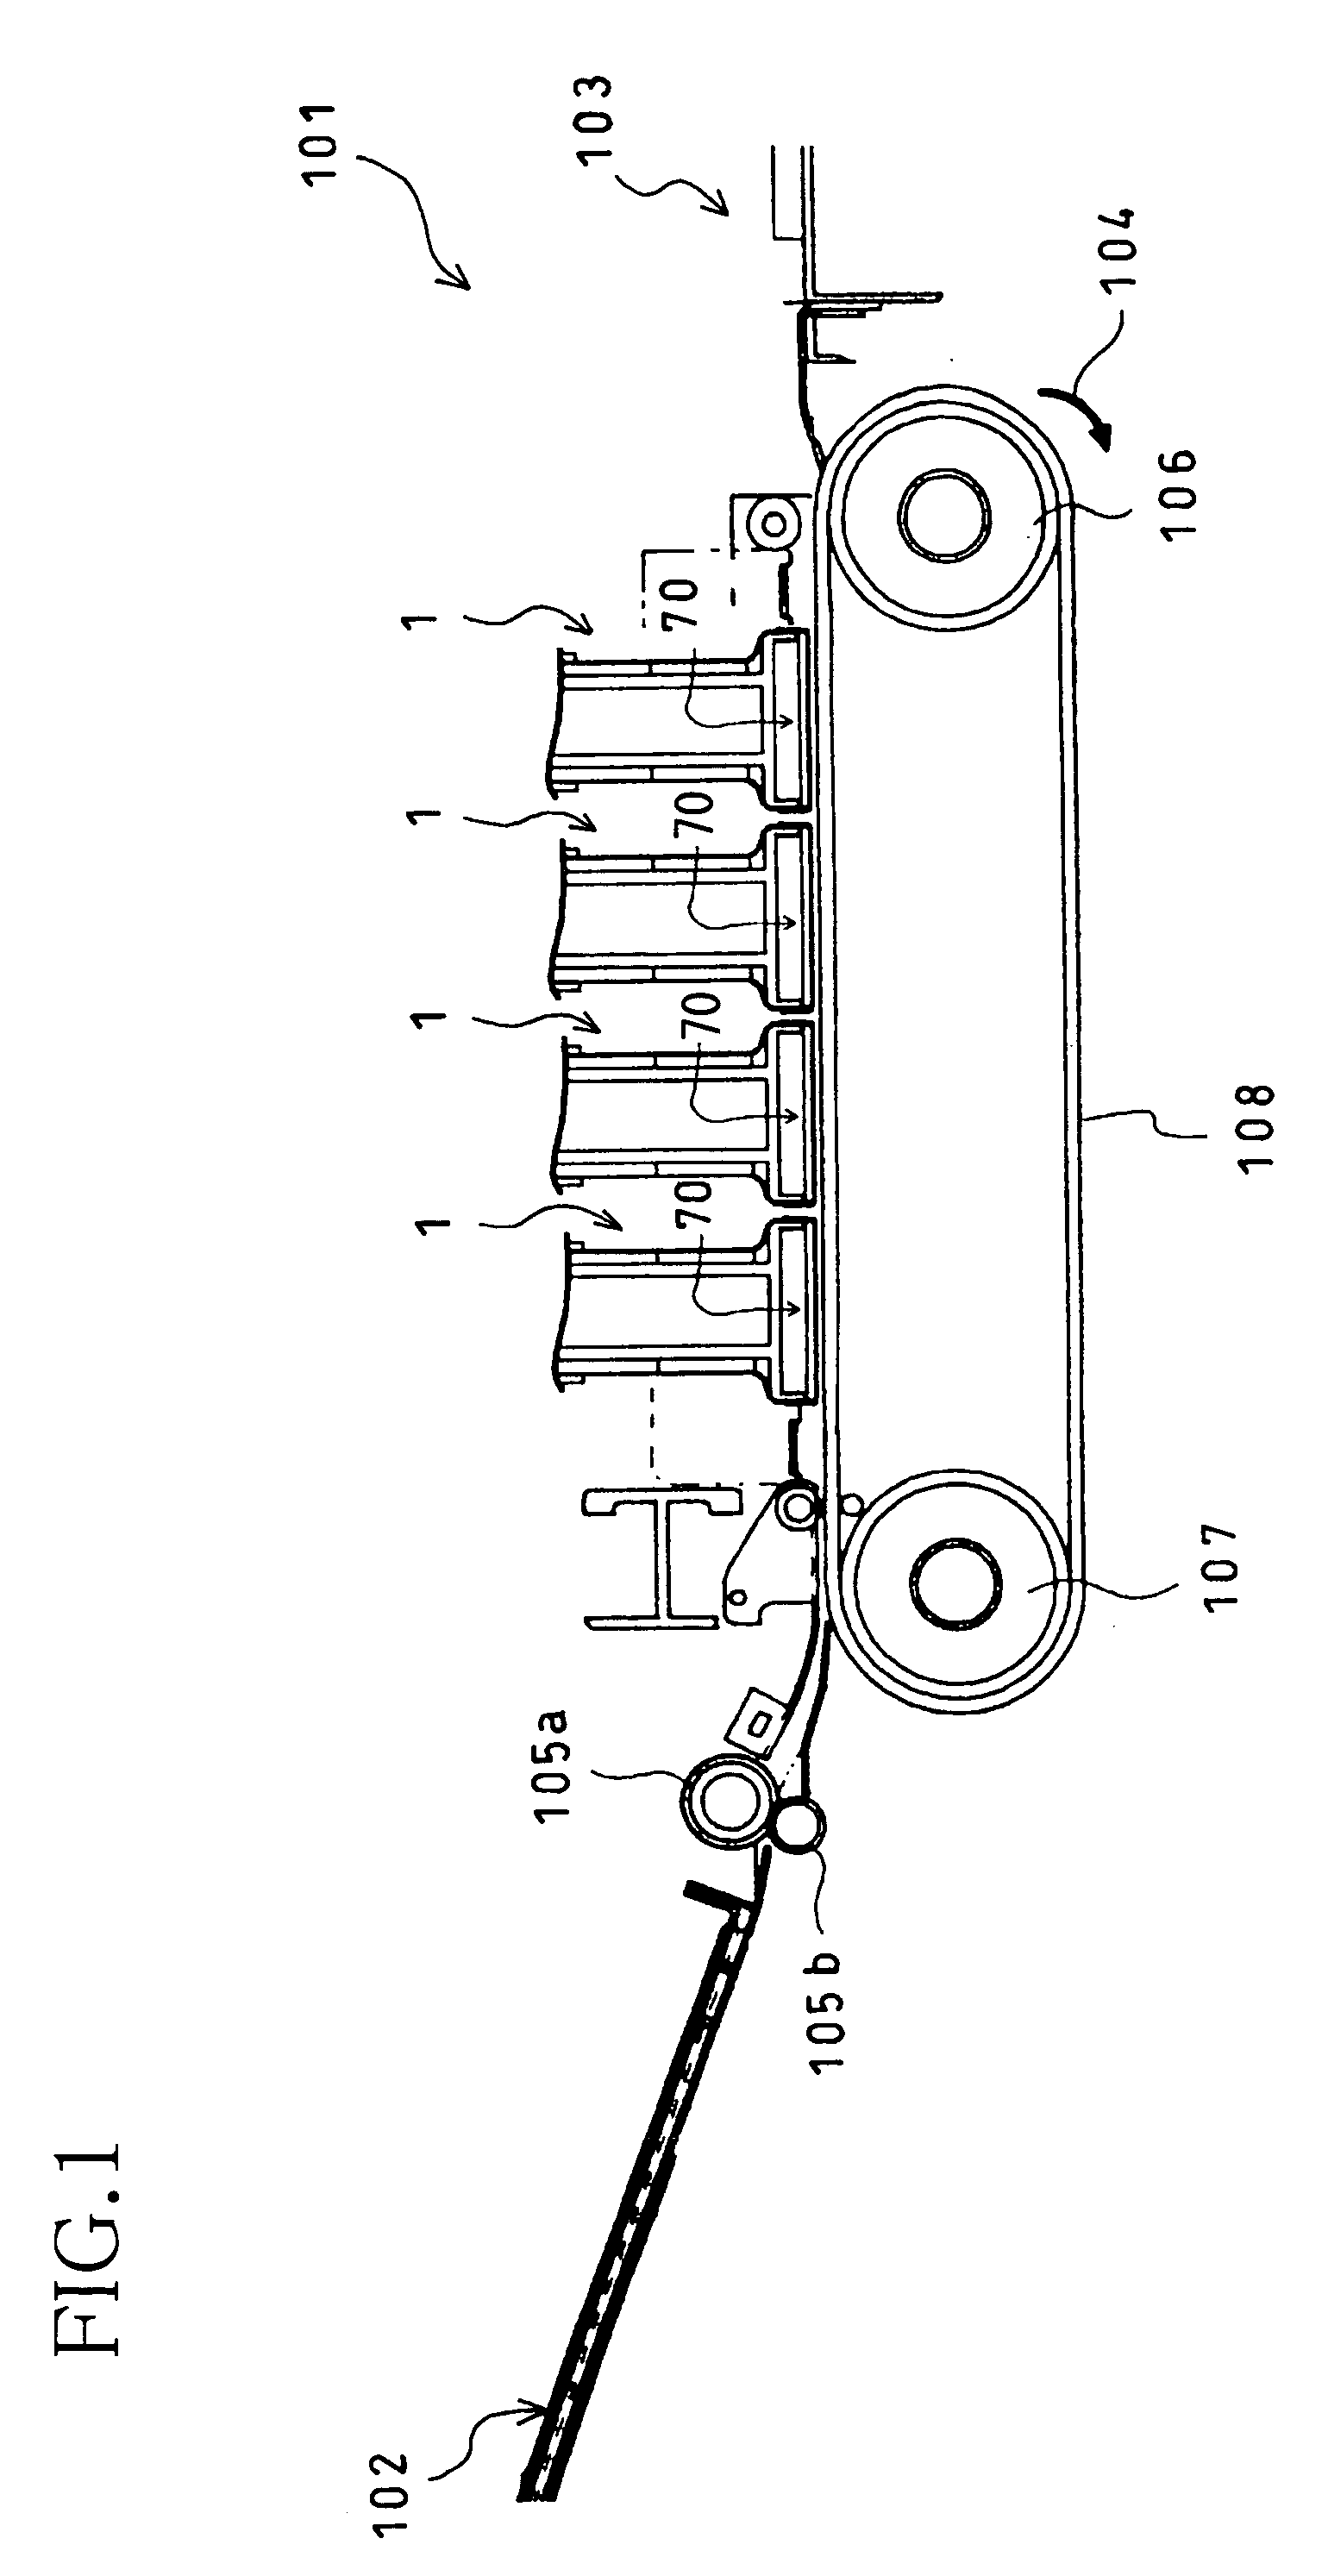 Method for manufacturing a printed circuit board that mounts an integrated circuit device thereon and the printed circuit board